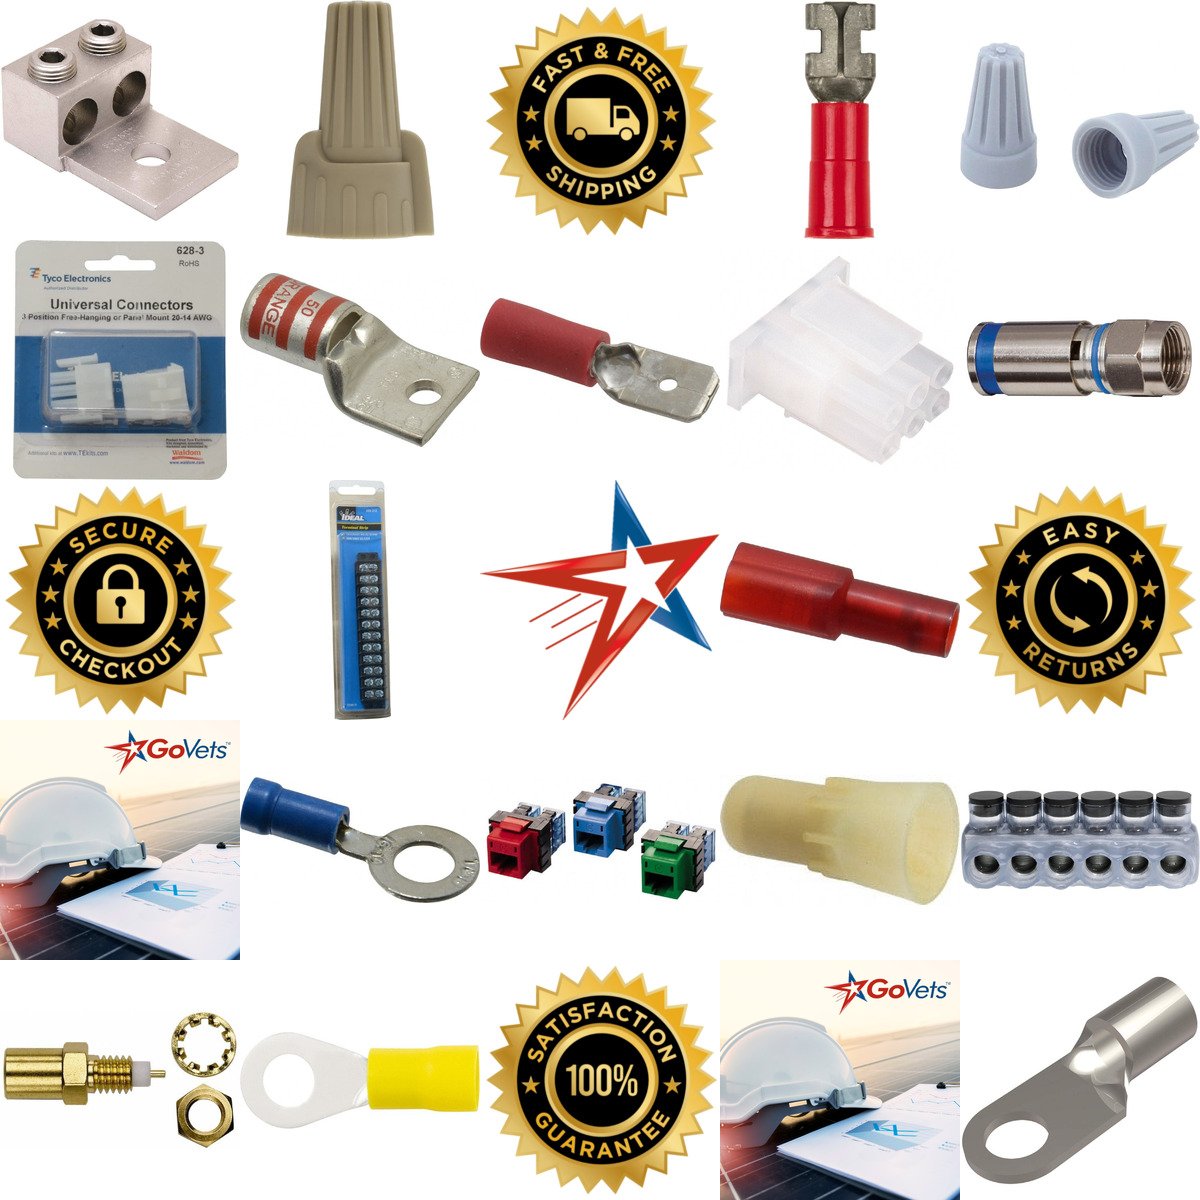 A selection of Electrical Connectors products on GoVets